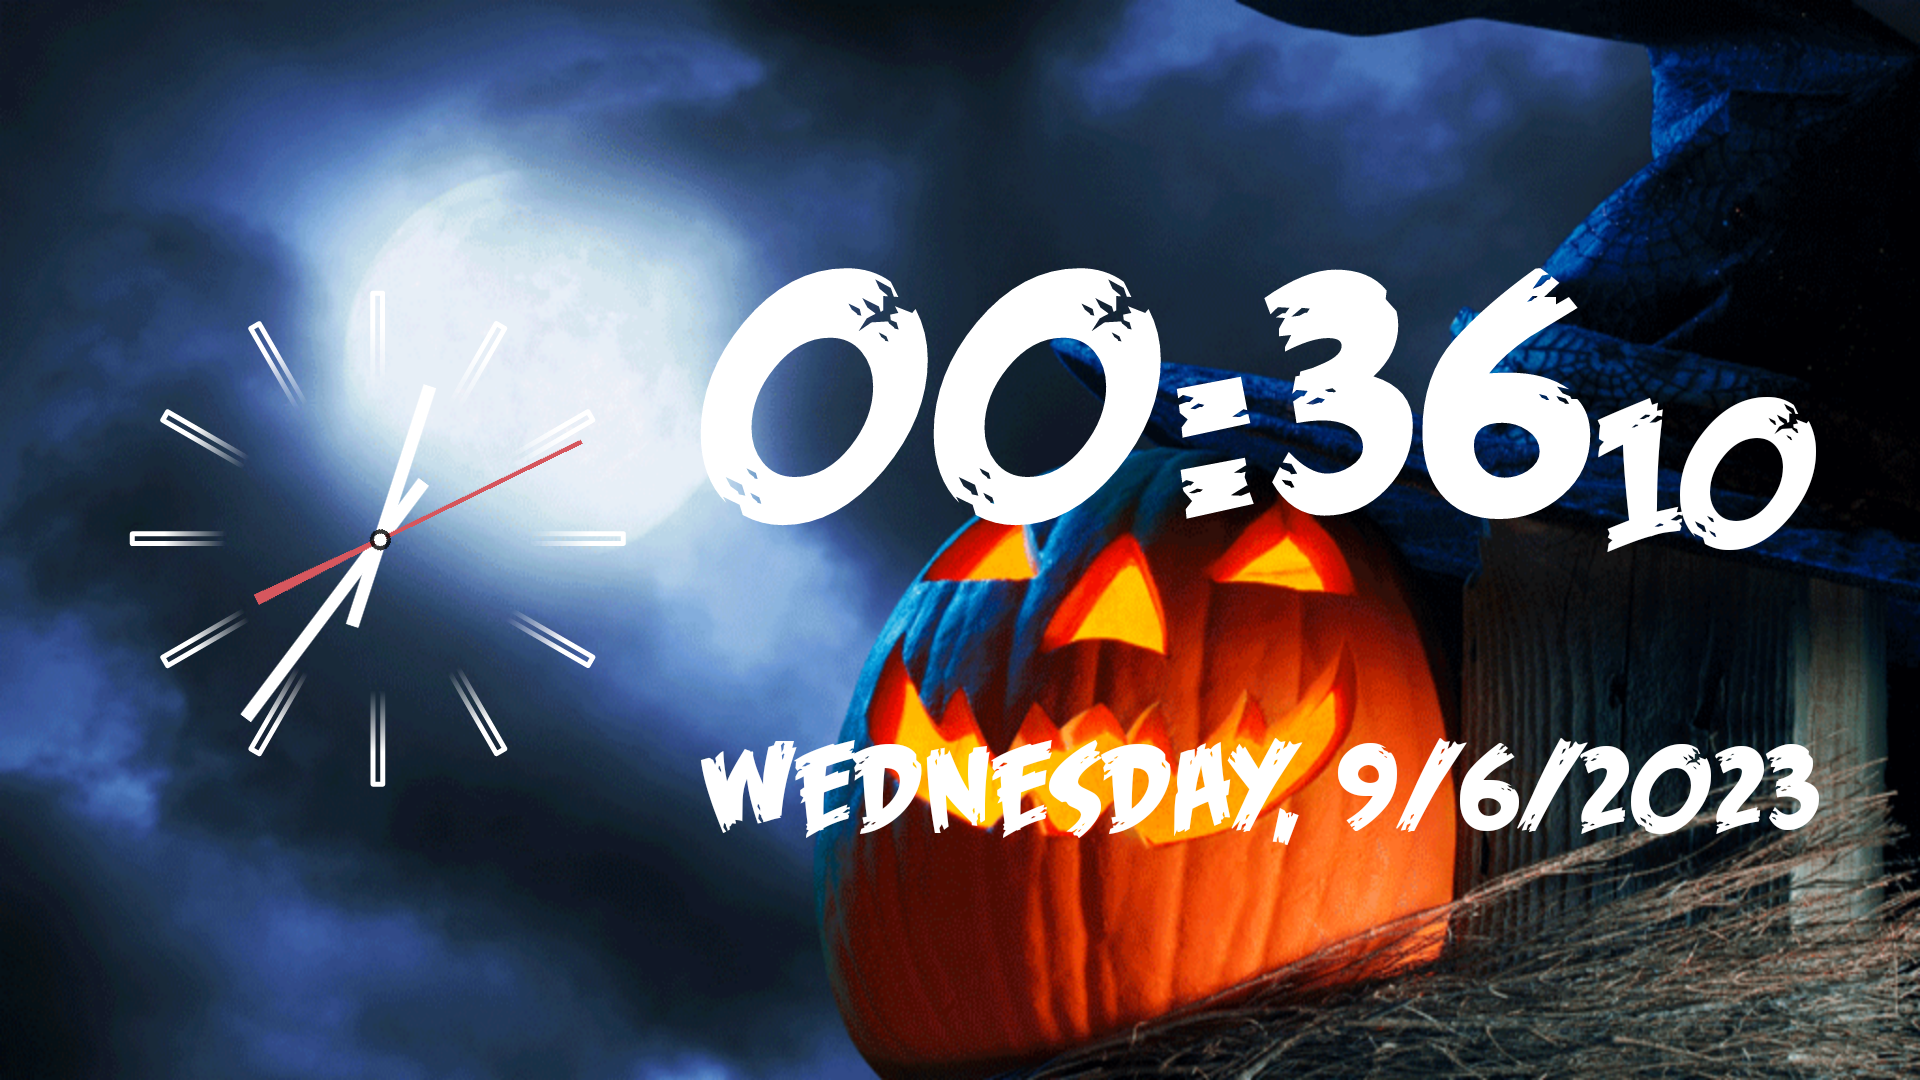 Halloween 🎃 Spooky Ambience Screensaver UHD: Halloween Spooky Ambience Wallpaper Screensaver Analog And Digital Clock with event manager For Tablets And Fire TVs - NO ADS